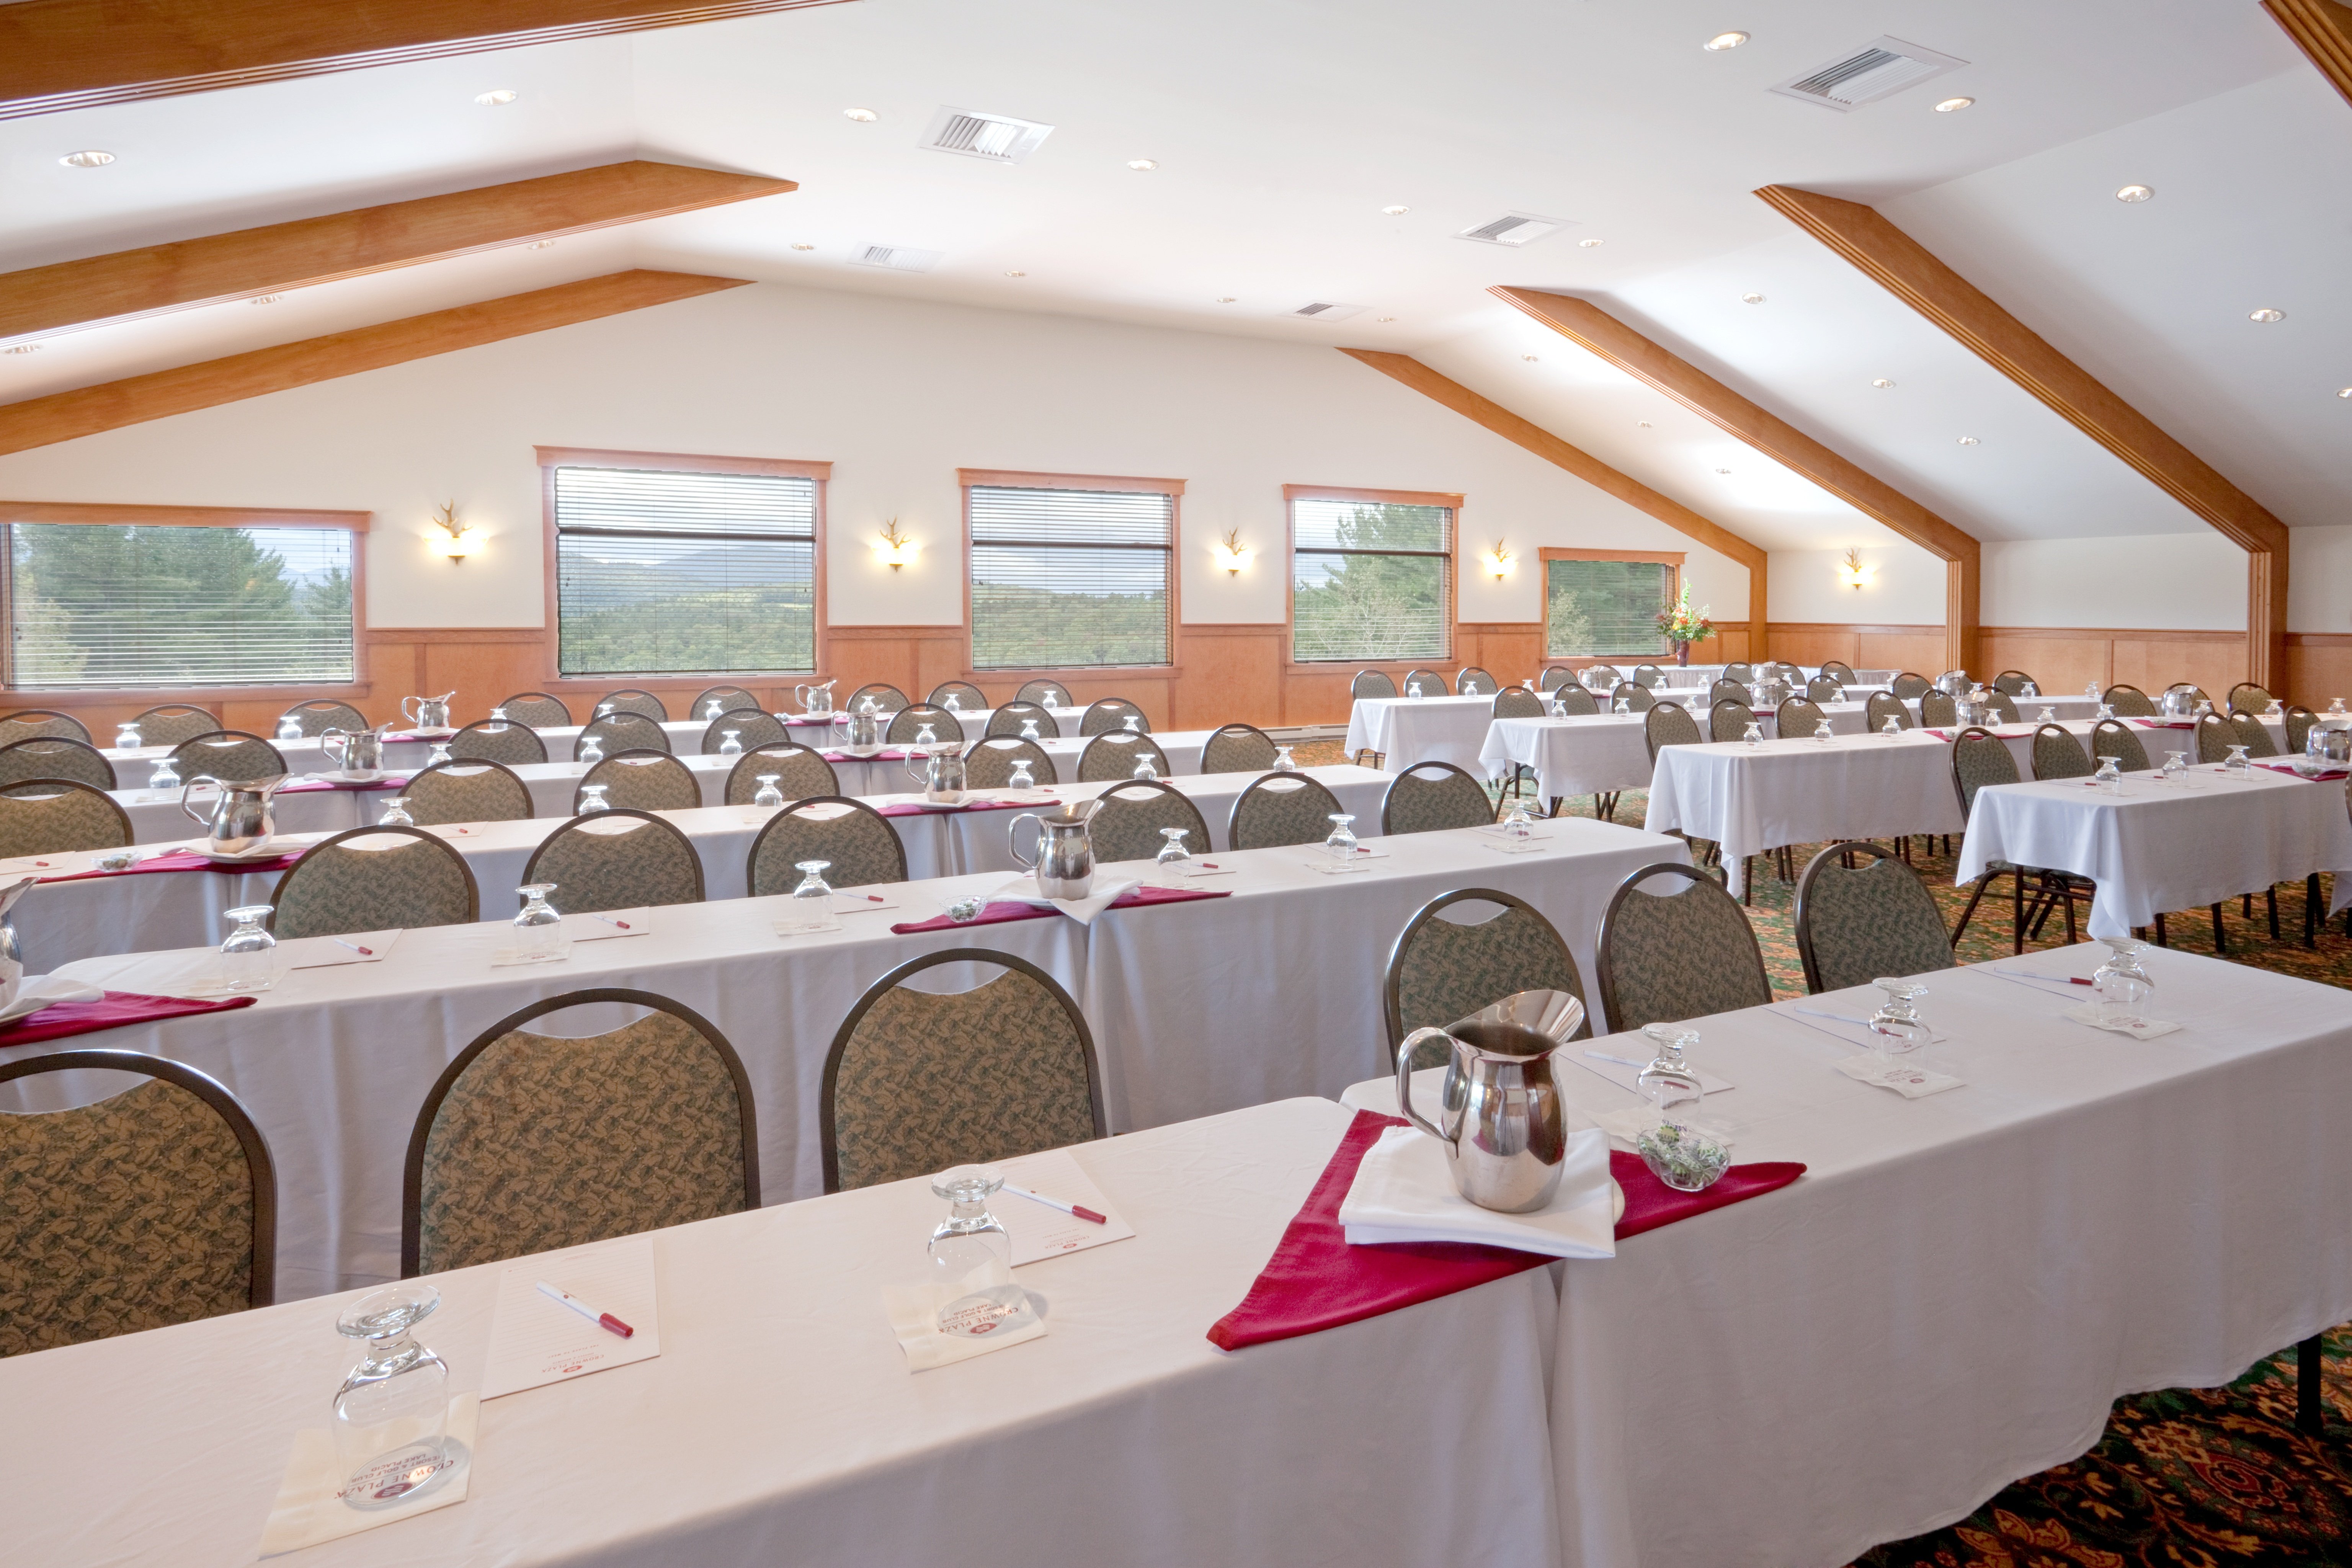 The Sky Room can accommodate both large and small groups